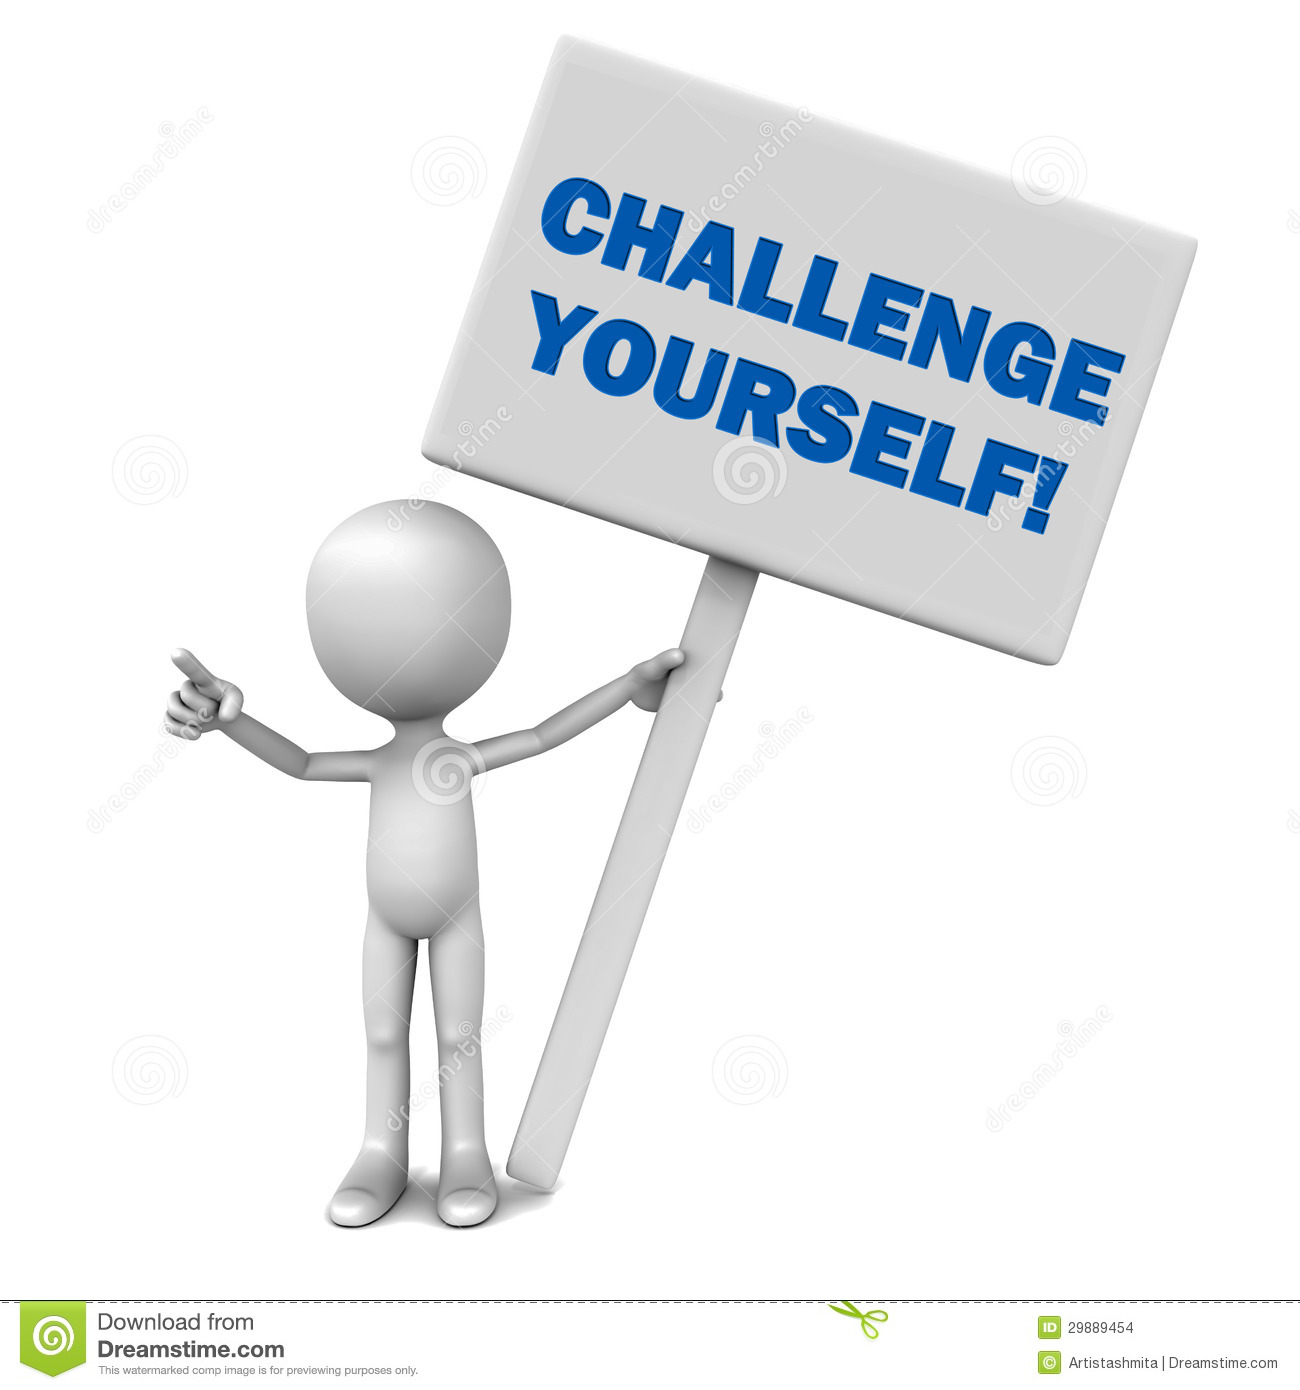 Challenge Yourself Words On A Large Banner Held Up By A Little 3d Man